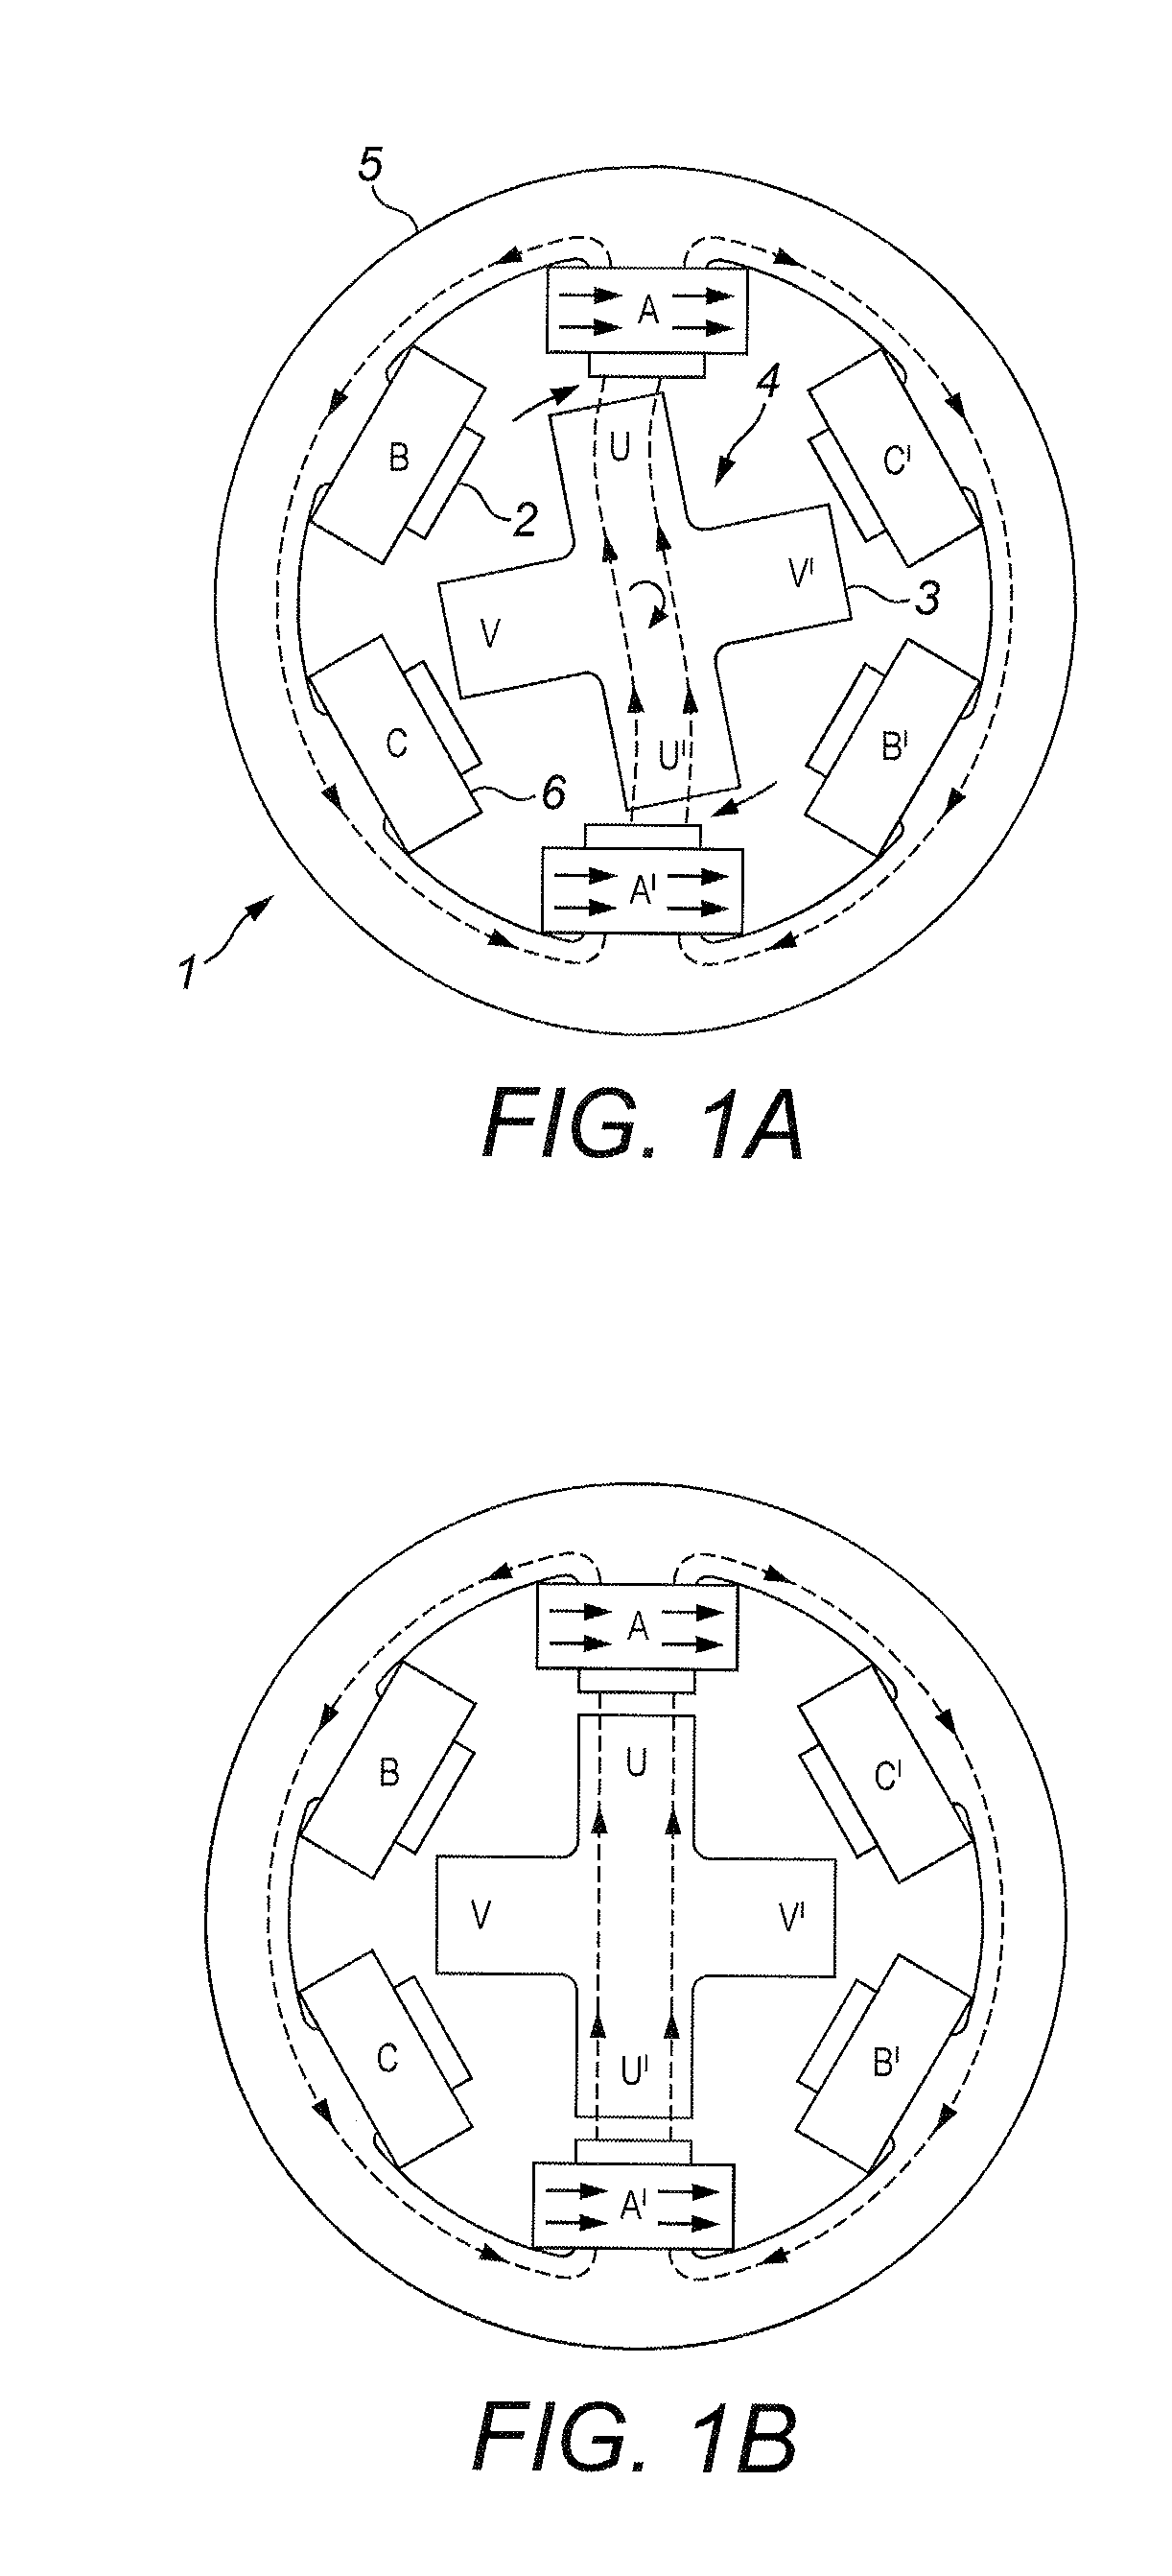 Switched reluctance motor starting methods